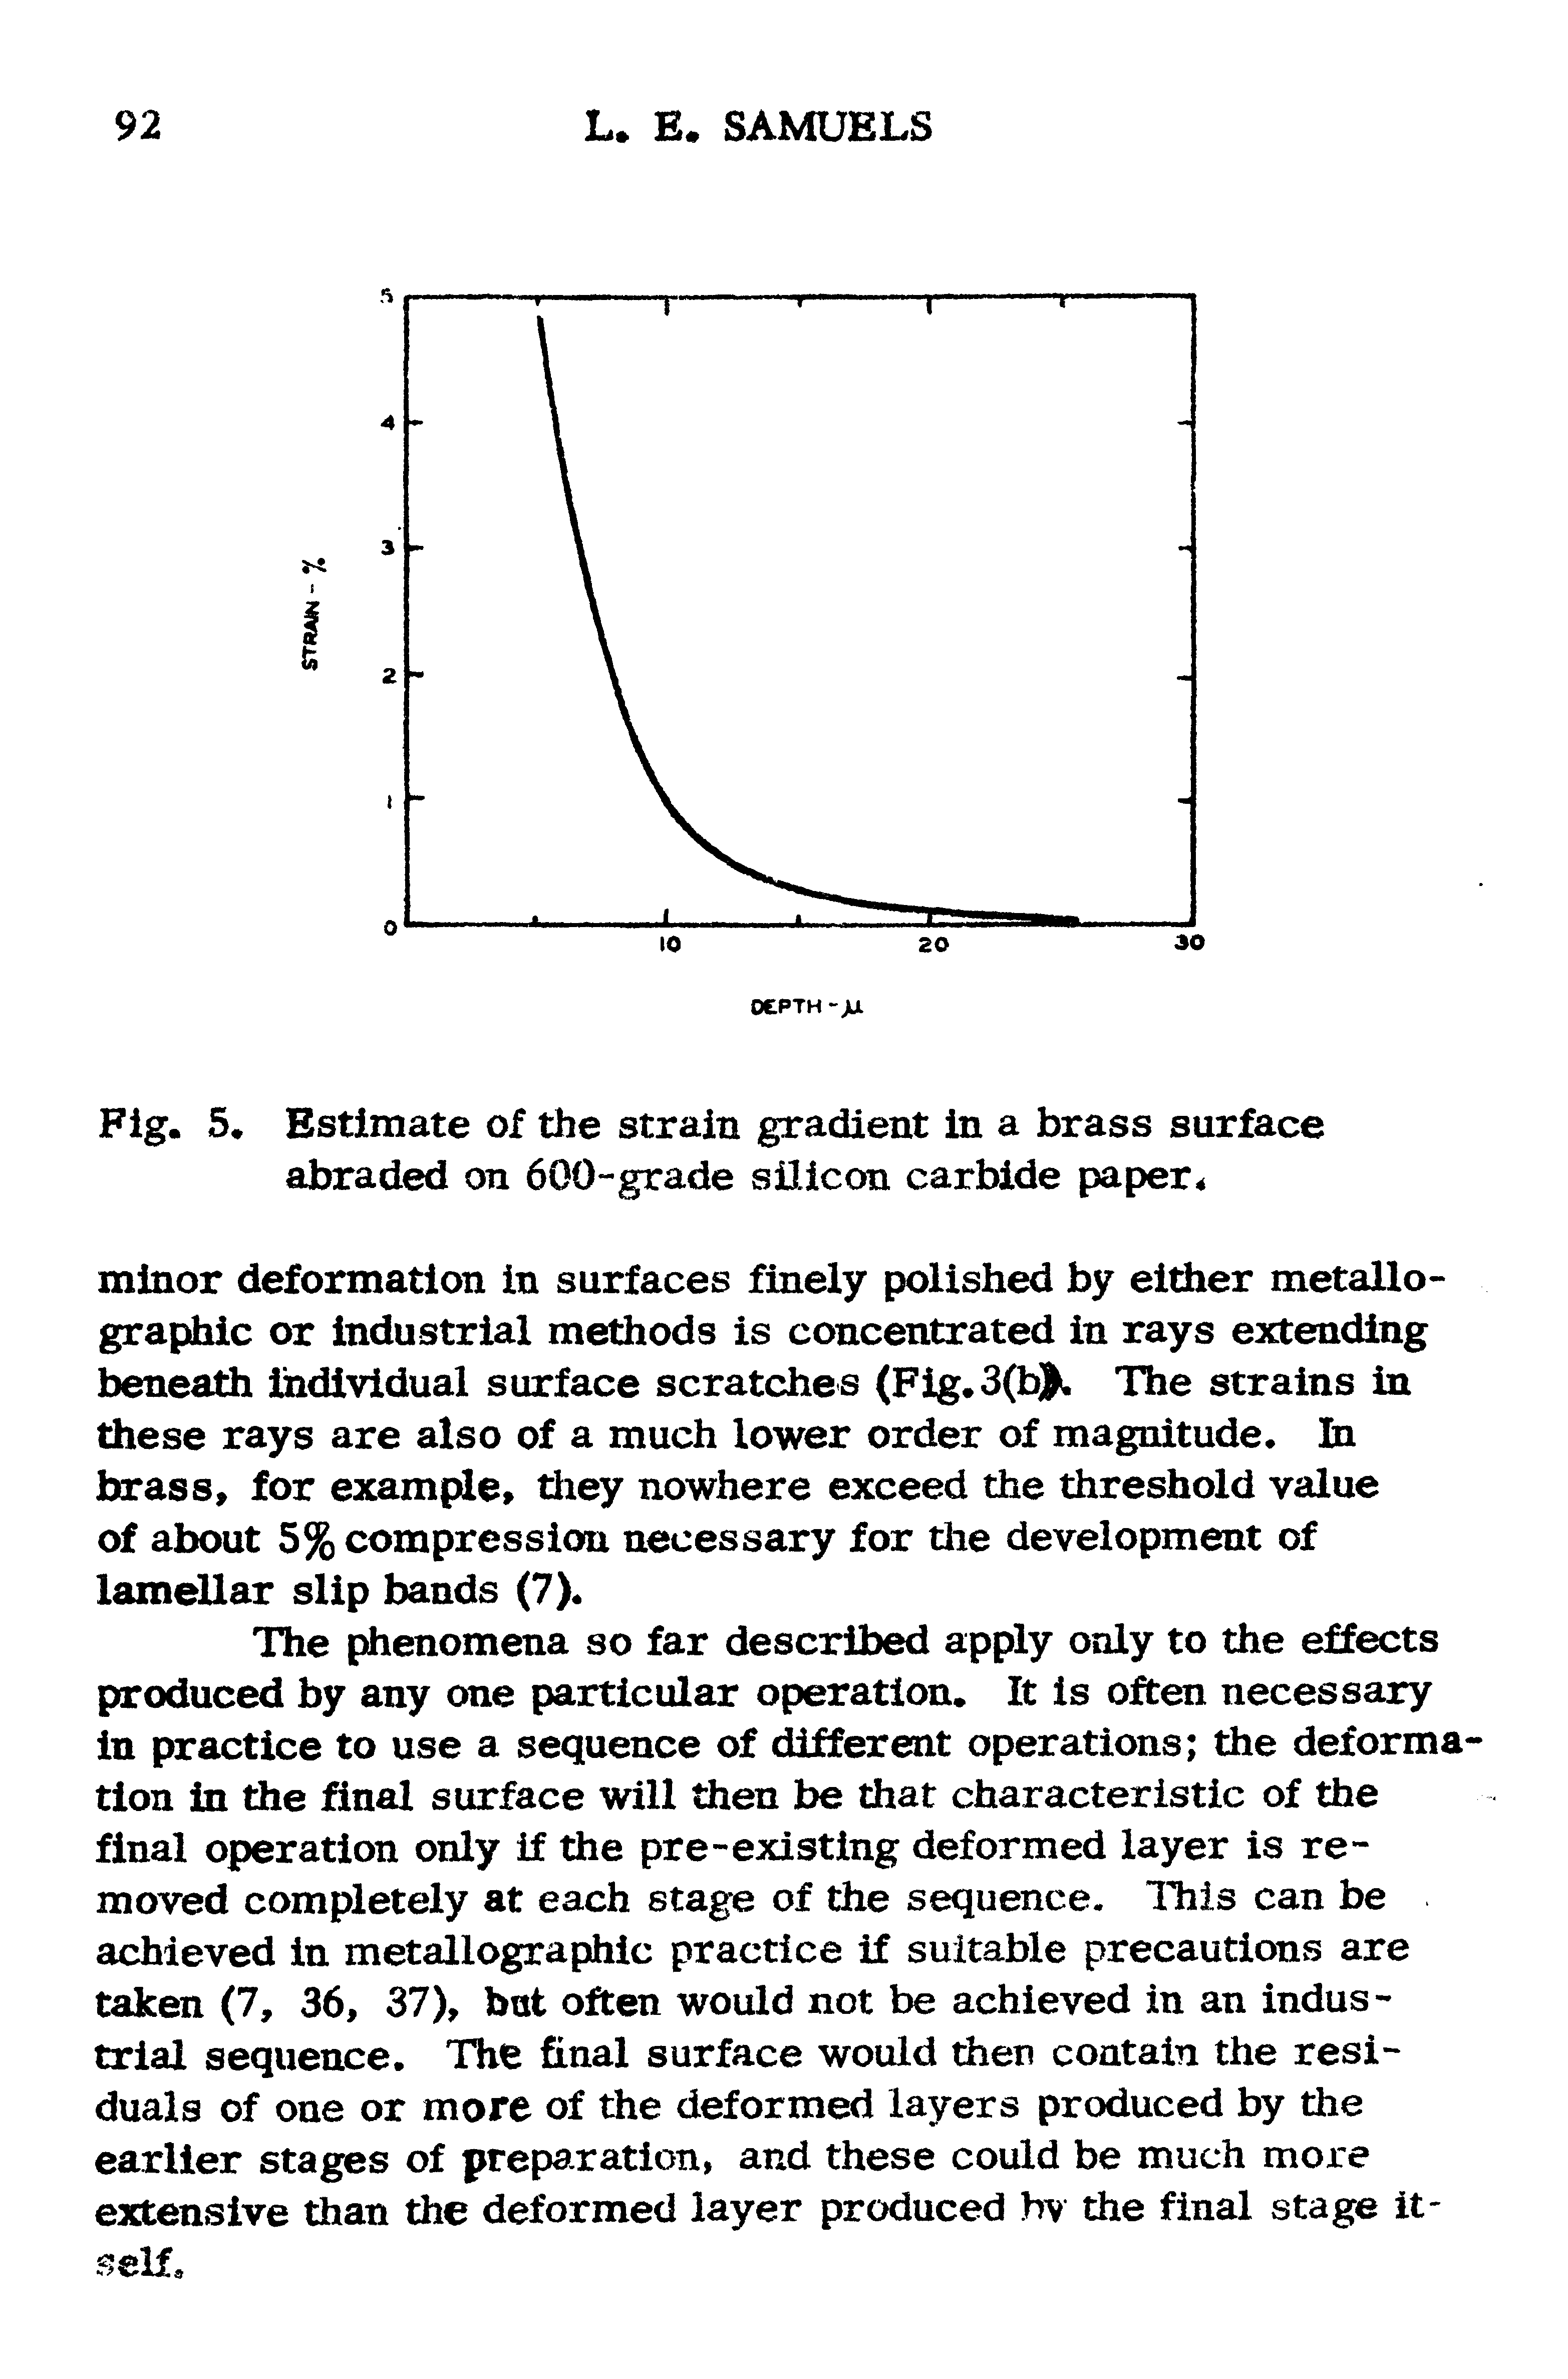 Fig. 5. Estimate of the strain gradient in a brass surface abraded on 600-grade silicon carbide paper.